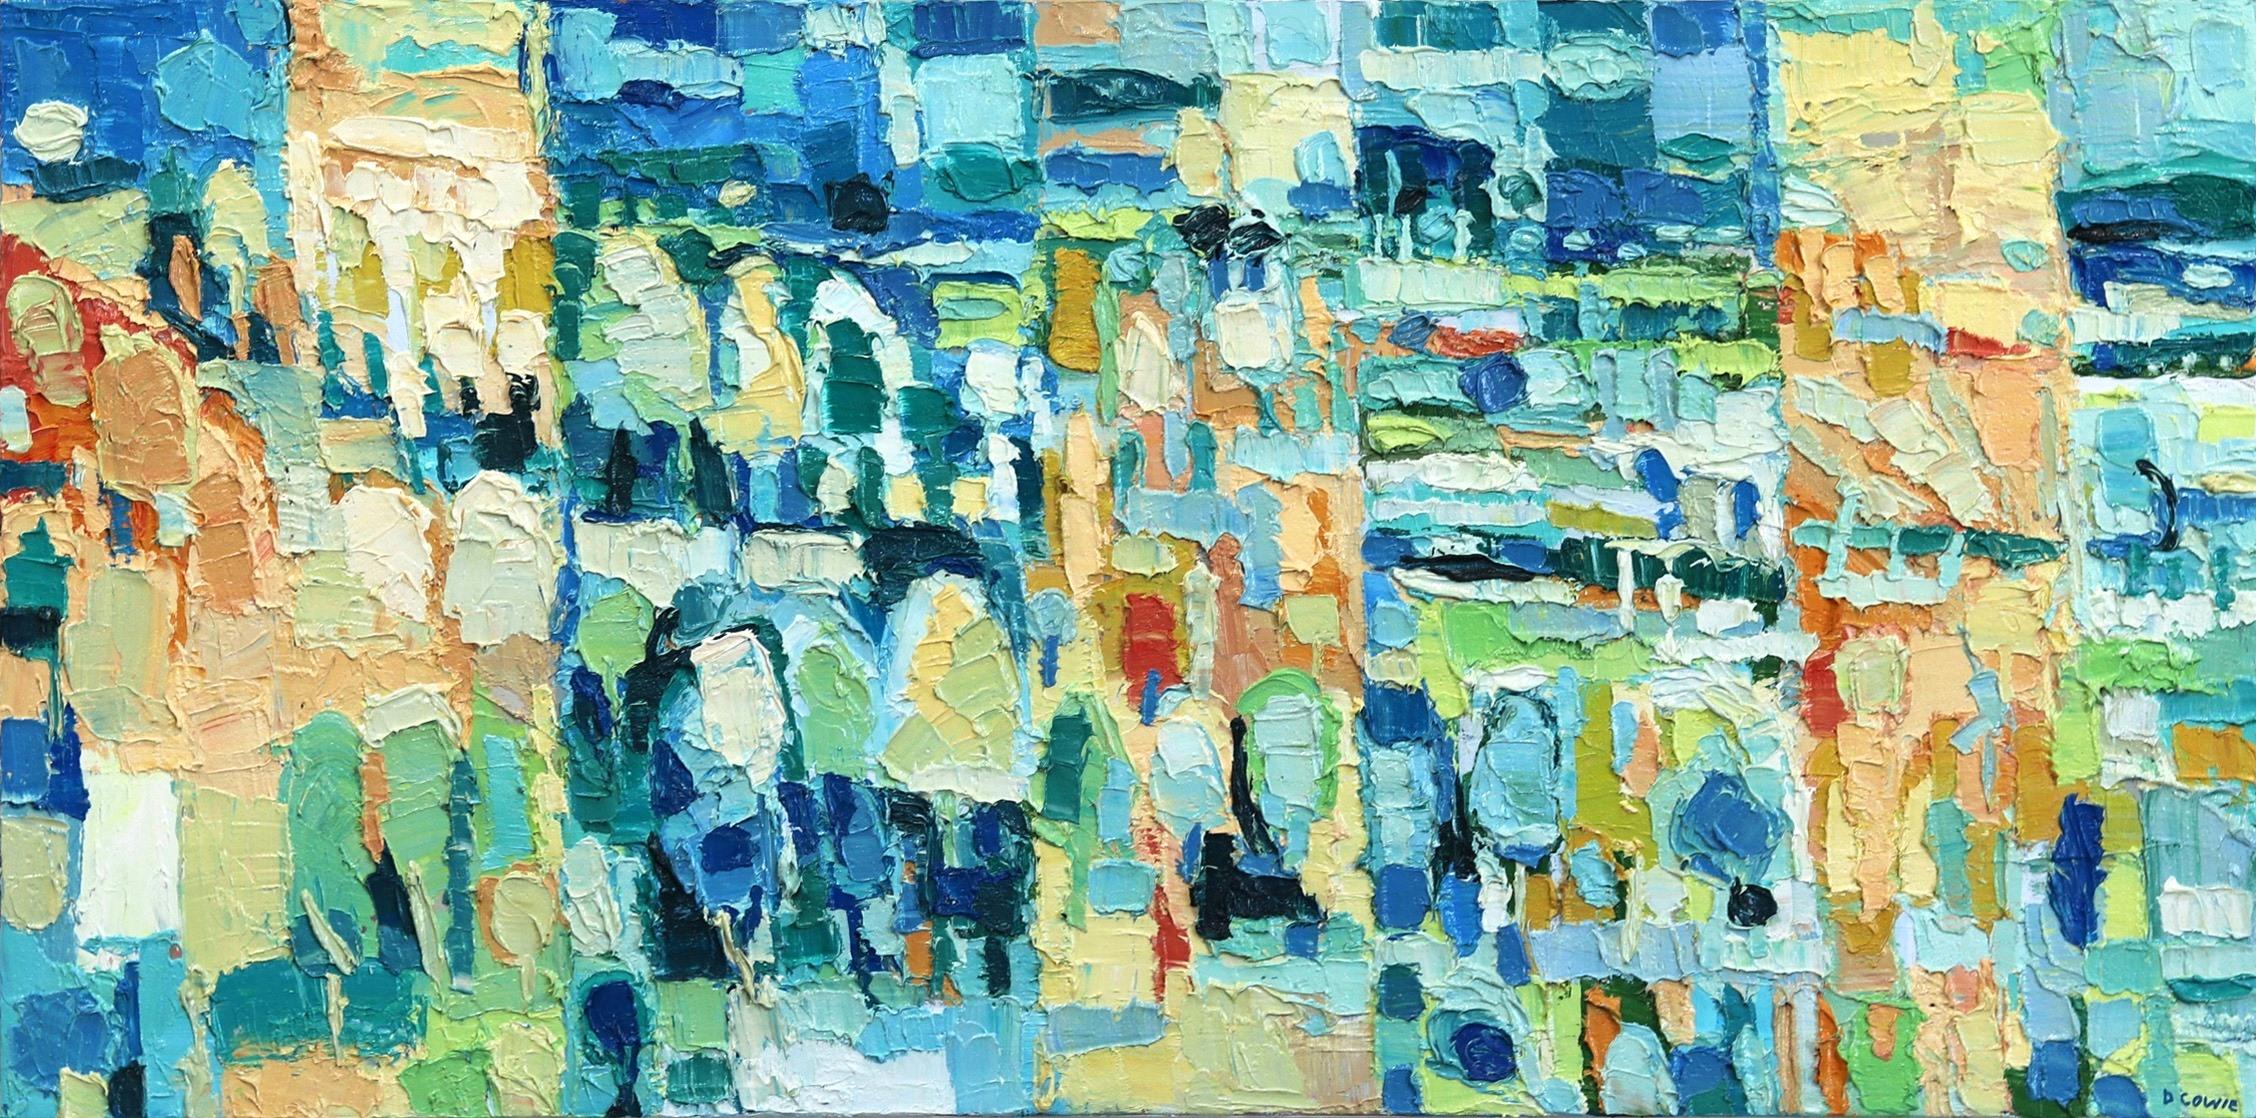 Dana Cowie Abstract Painting - "Seasonal Shift" - Original Impasto Abstract Landscape Painting